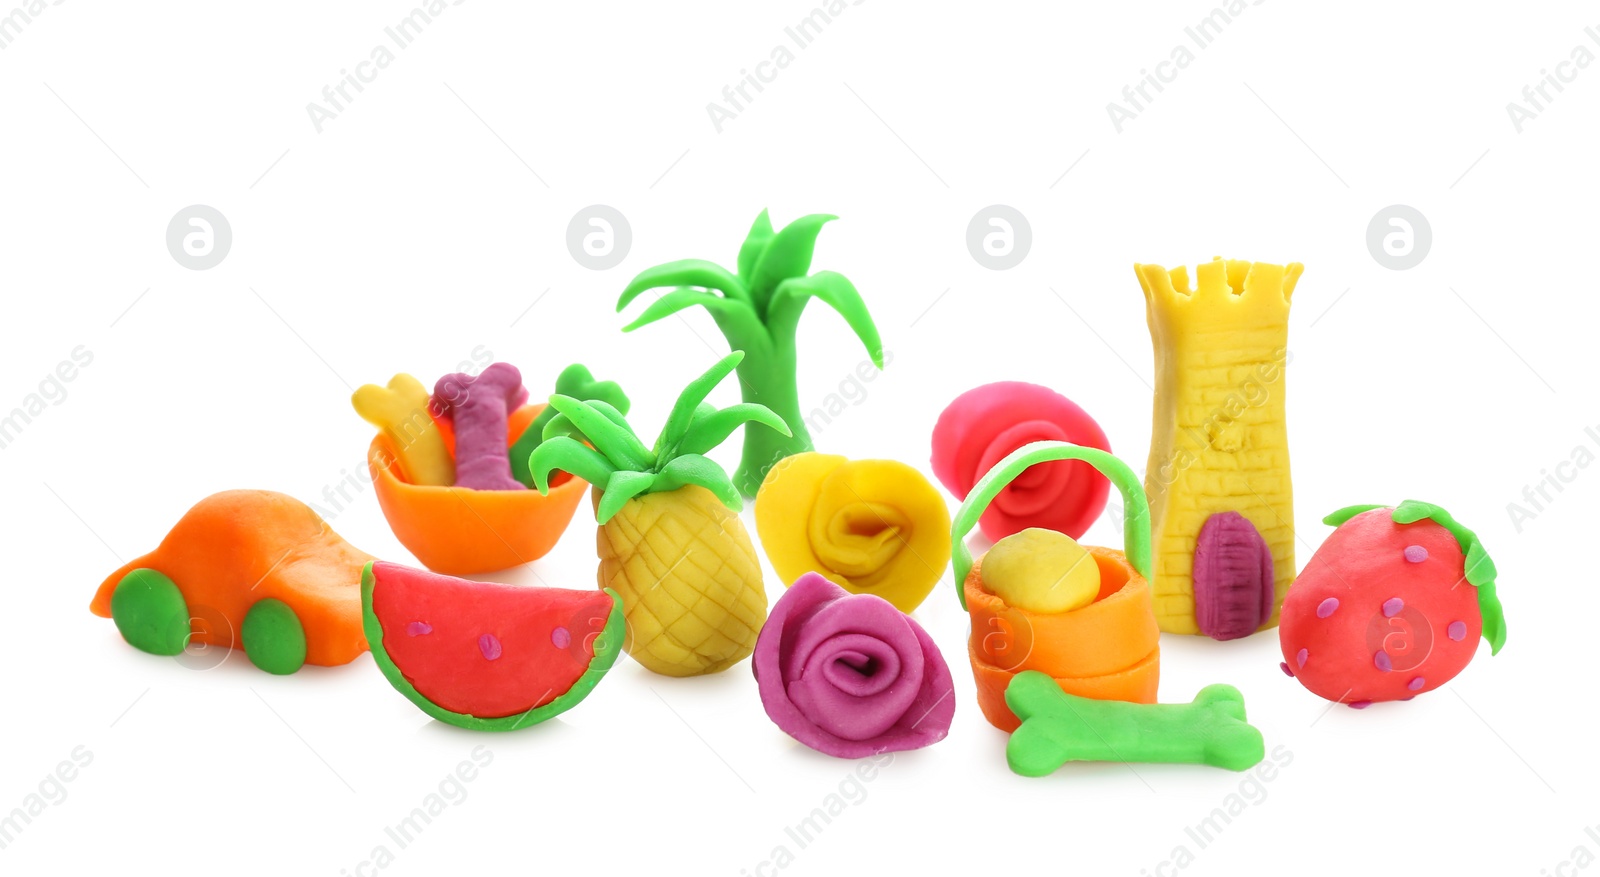 Photo of Collection of small figures made from play dough on white background